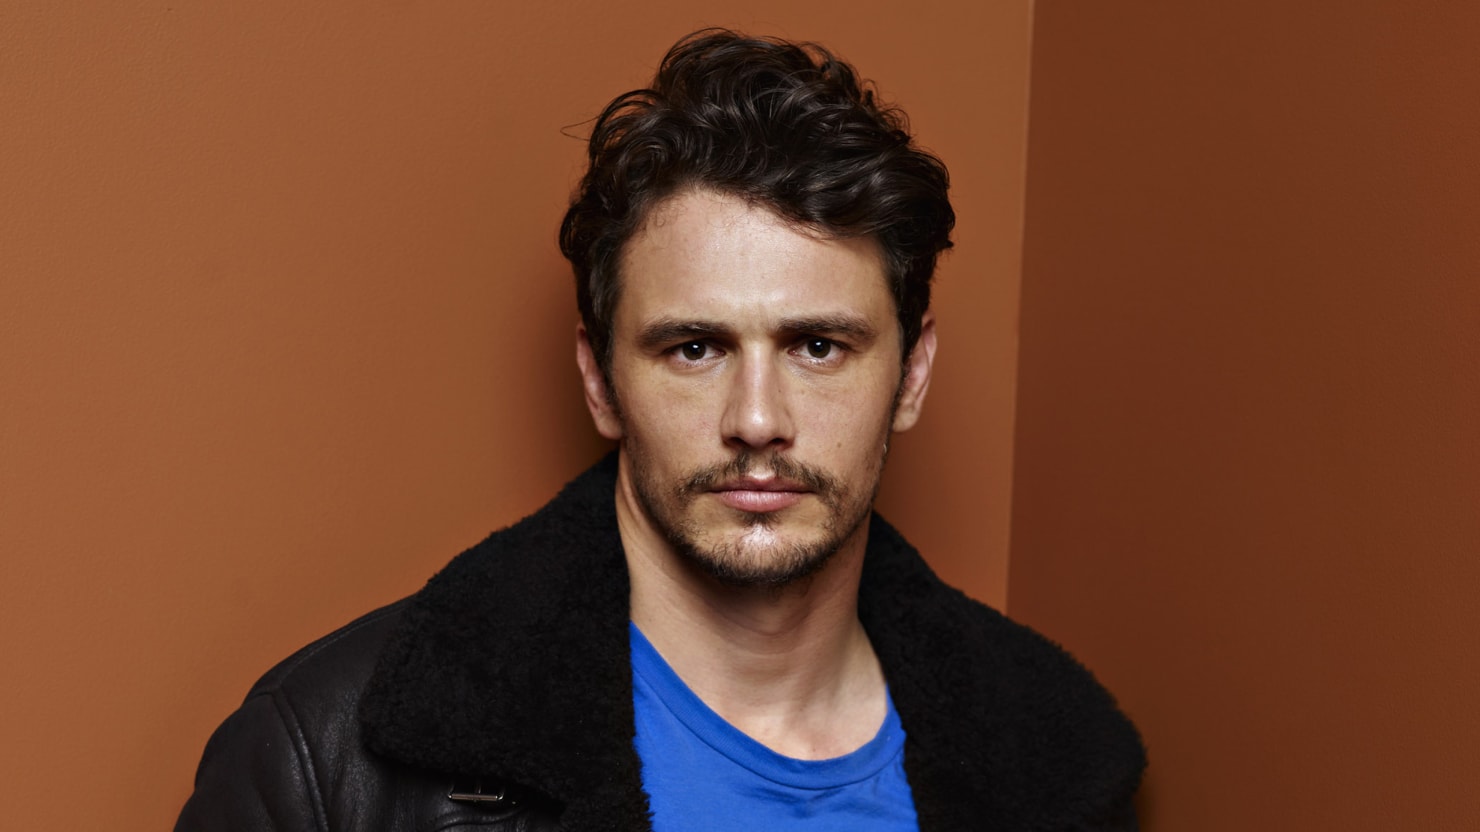 James Franco Uncensored: The Actor on Broadway NYTand That Half